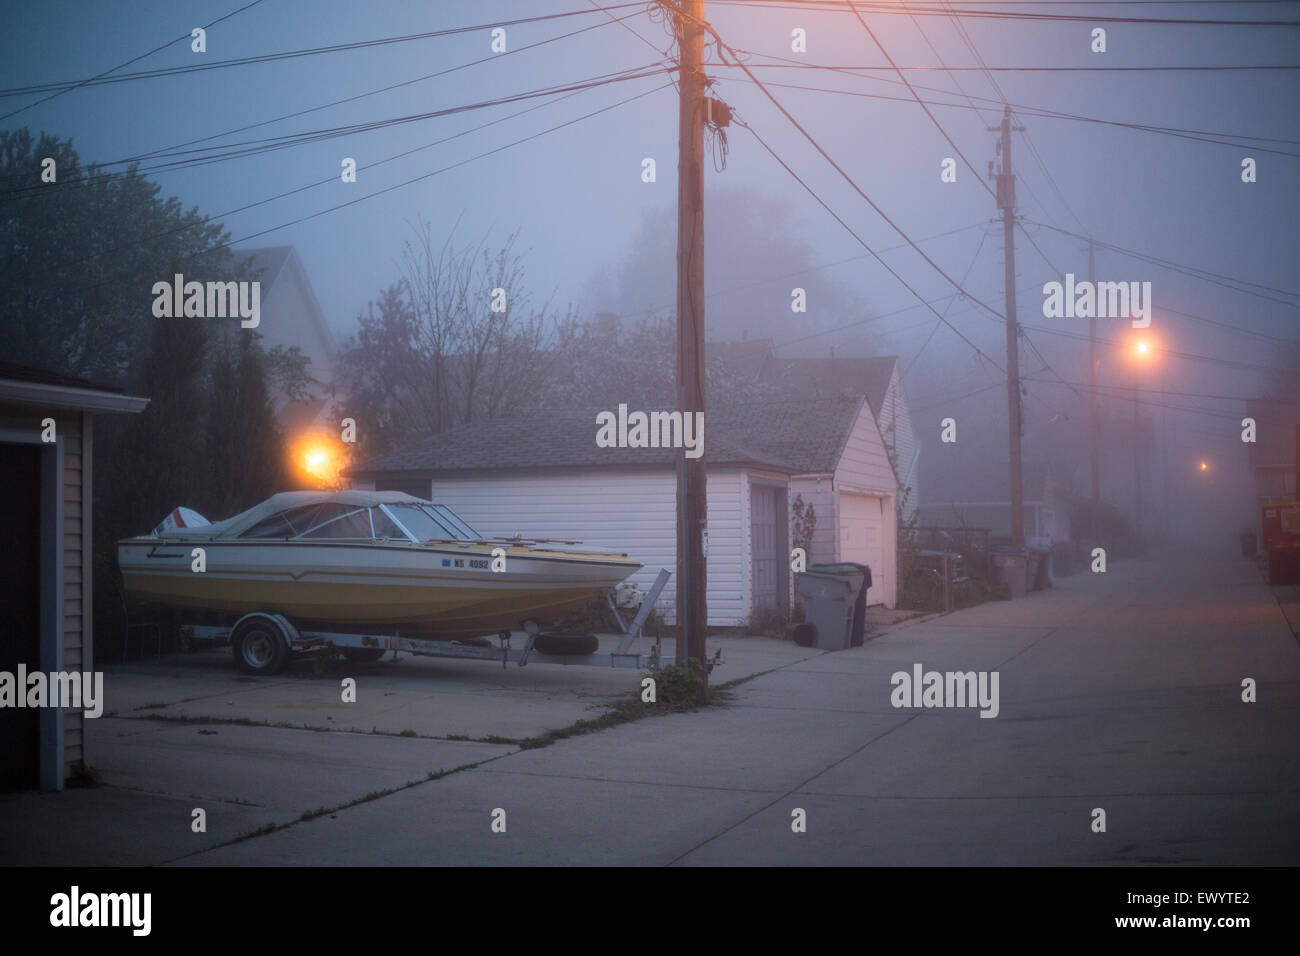 A foggy urban landscape at dusk with a boat parked in an alley Stock Photo